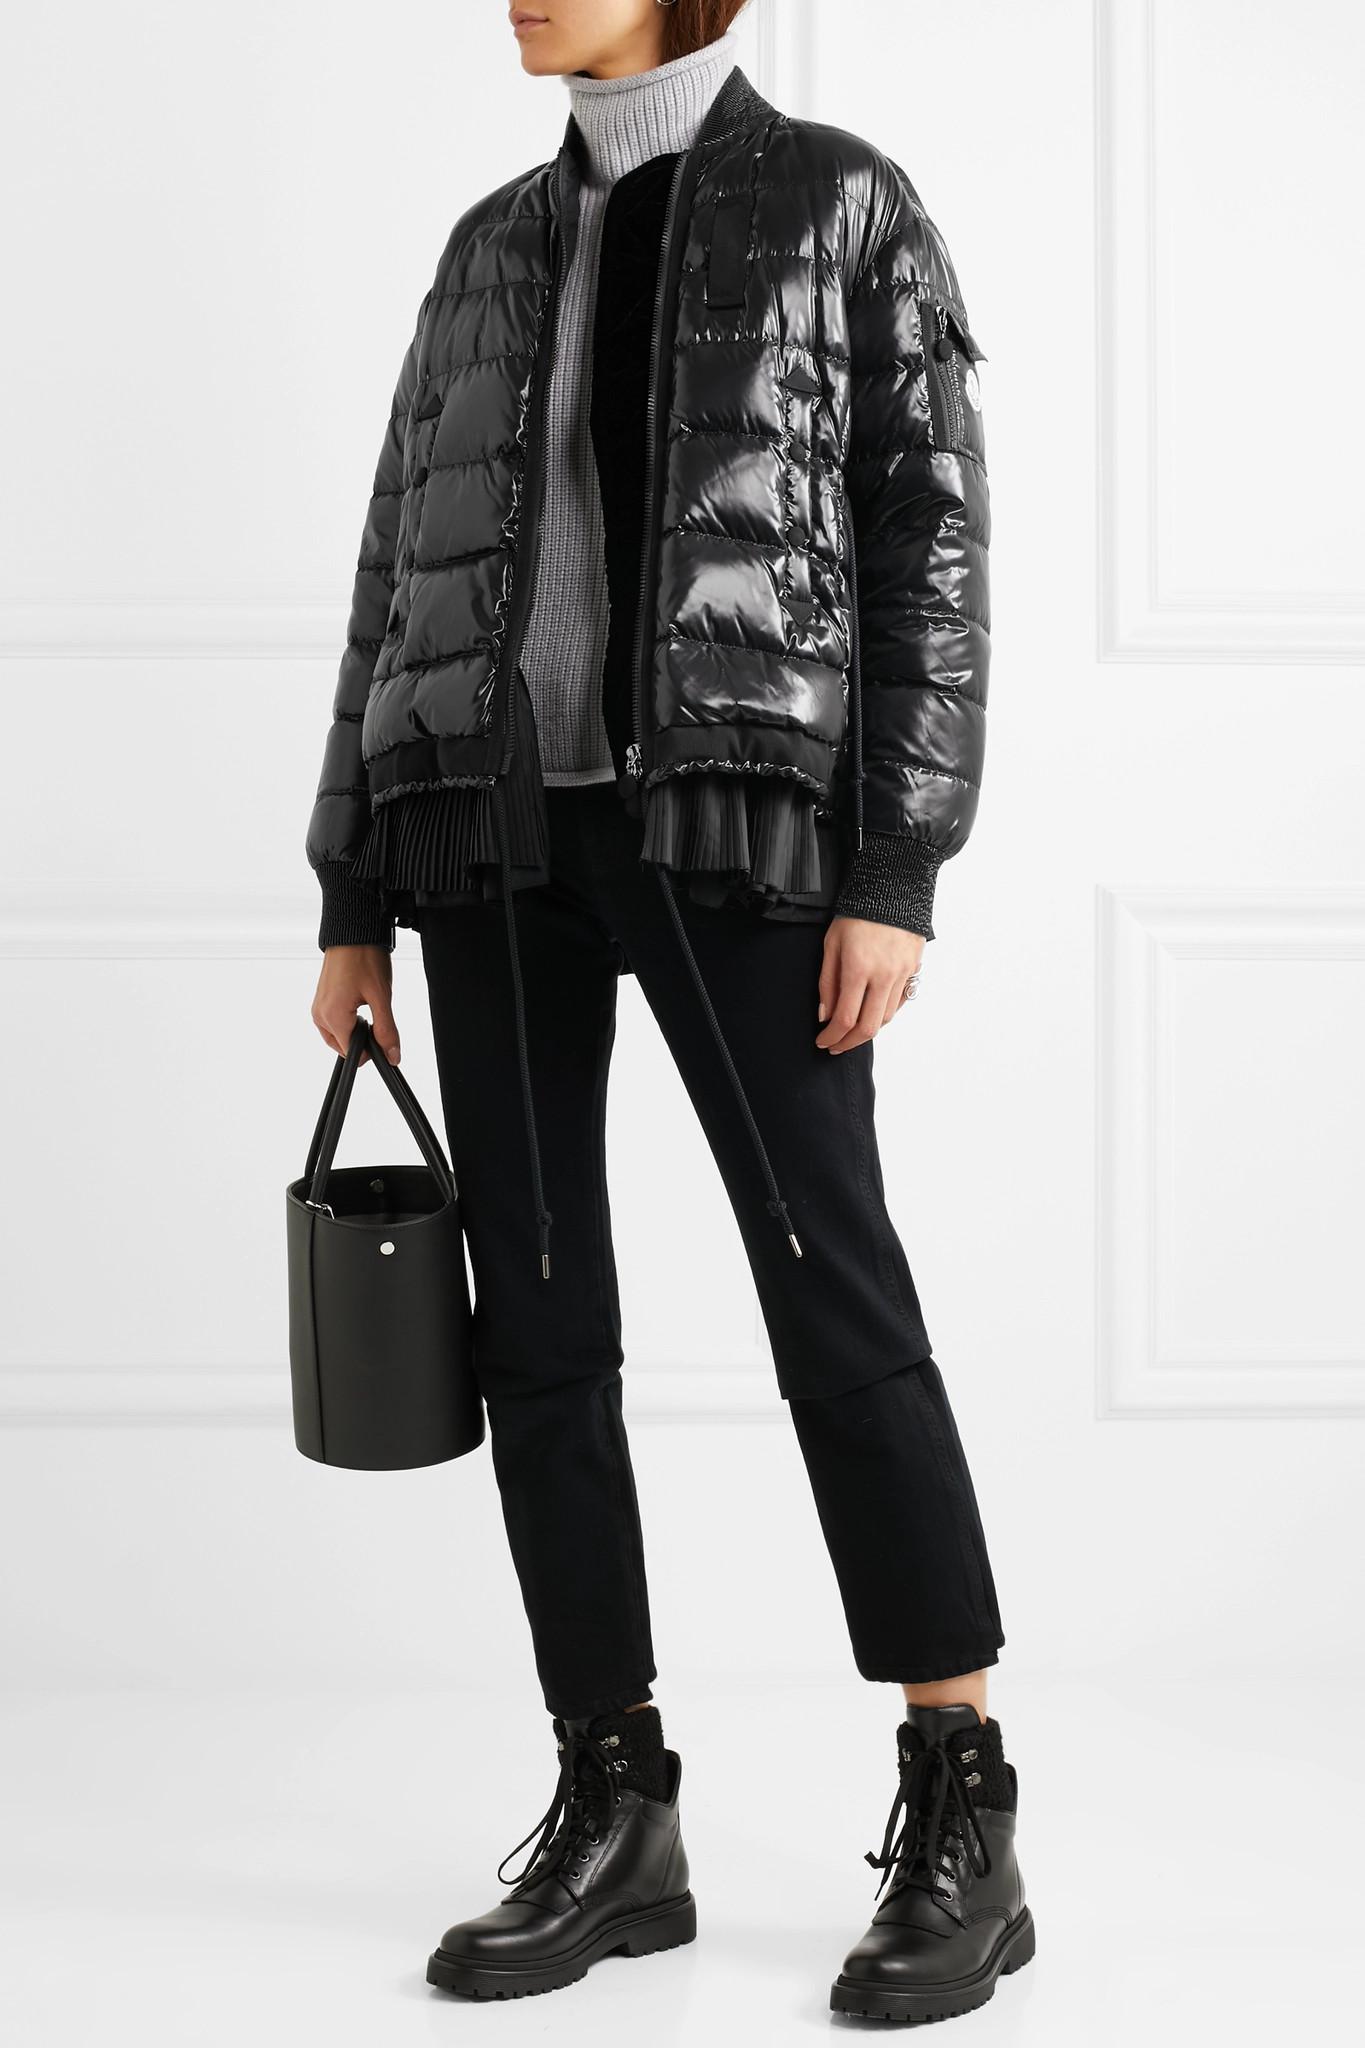 moncler lucy jacket